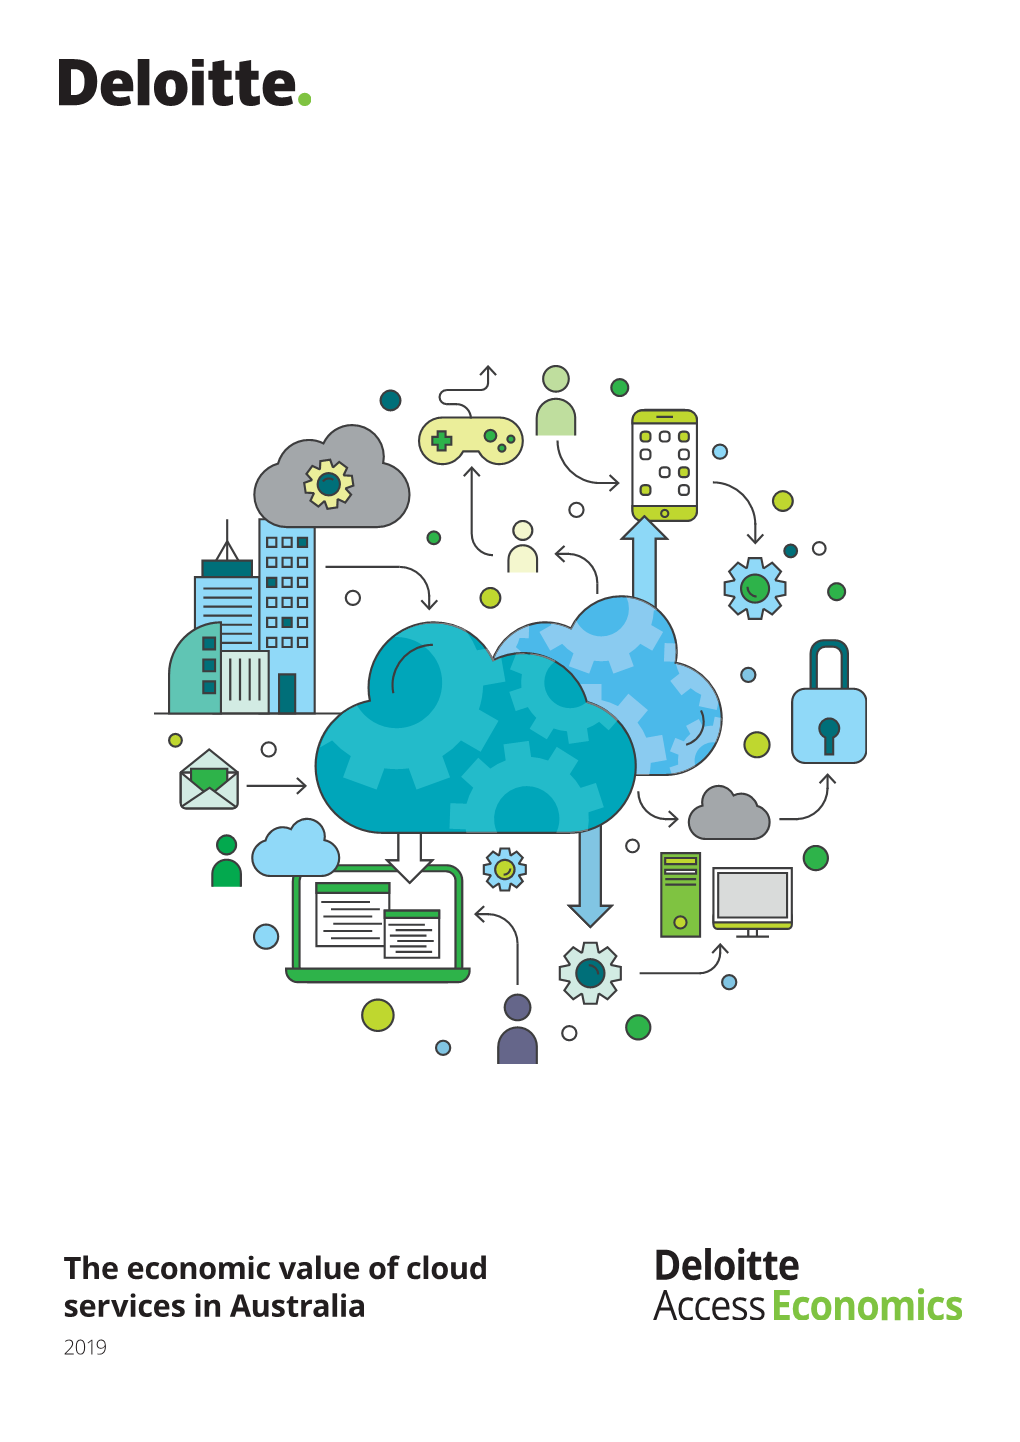 The Economic Value of Cloud Services in Australia 2019 the Economic Value of Cloud Services in Australia